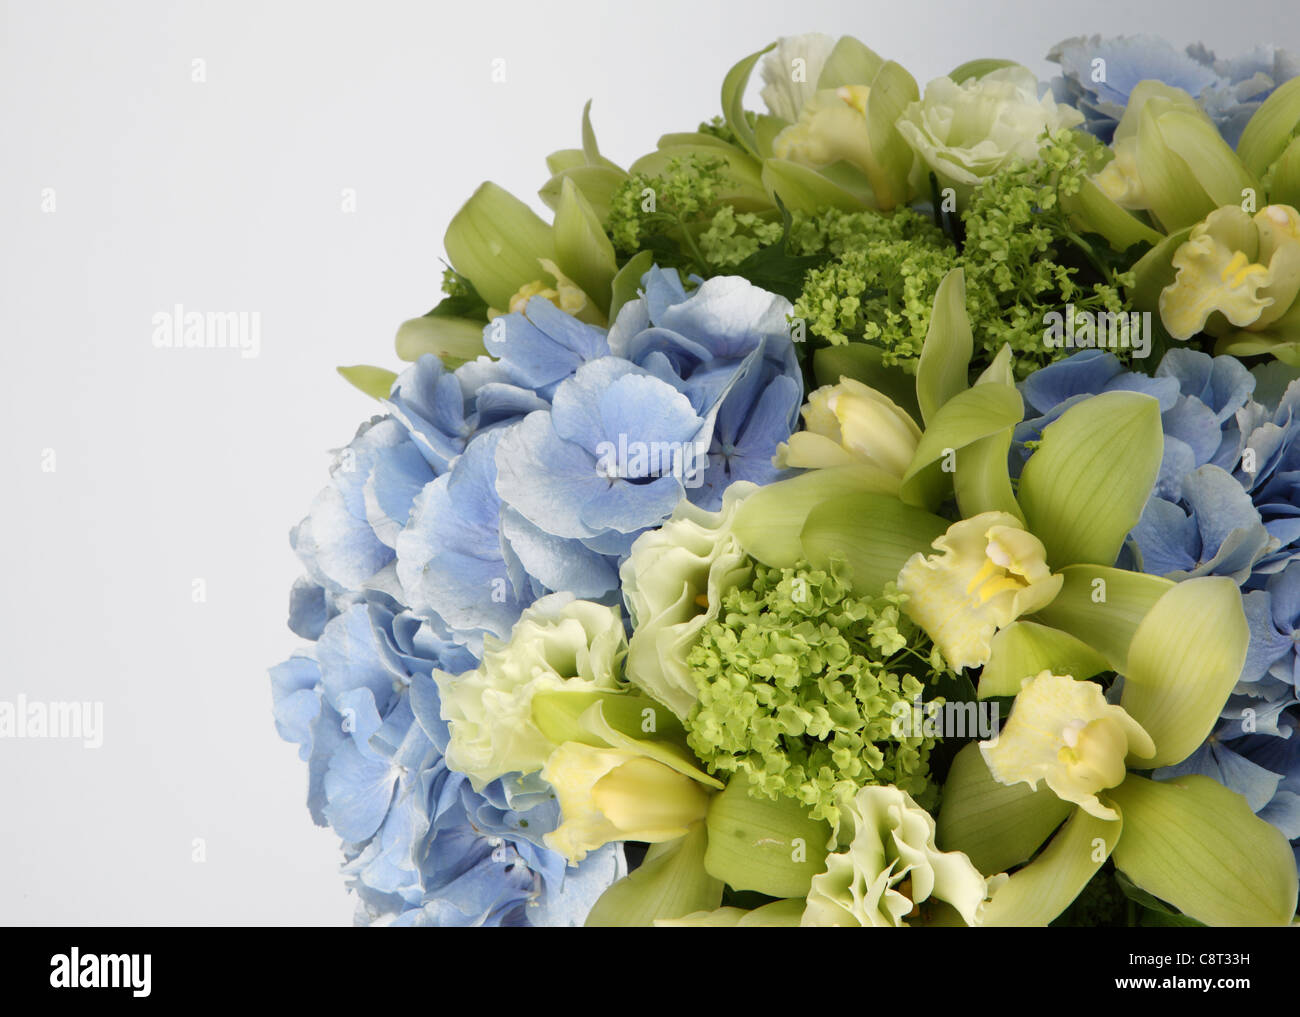 A close-up of a colorful bouquet of flowers. A blue hydrangea, small green hydrangeas and pale green cymbidium orchids. Stock Photo